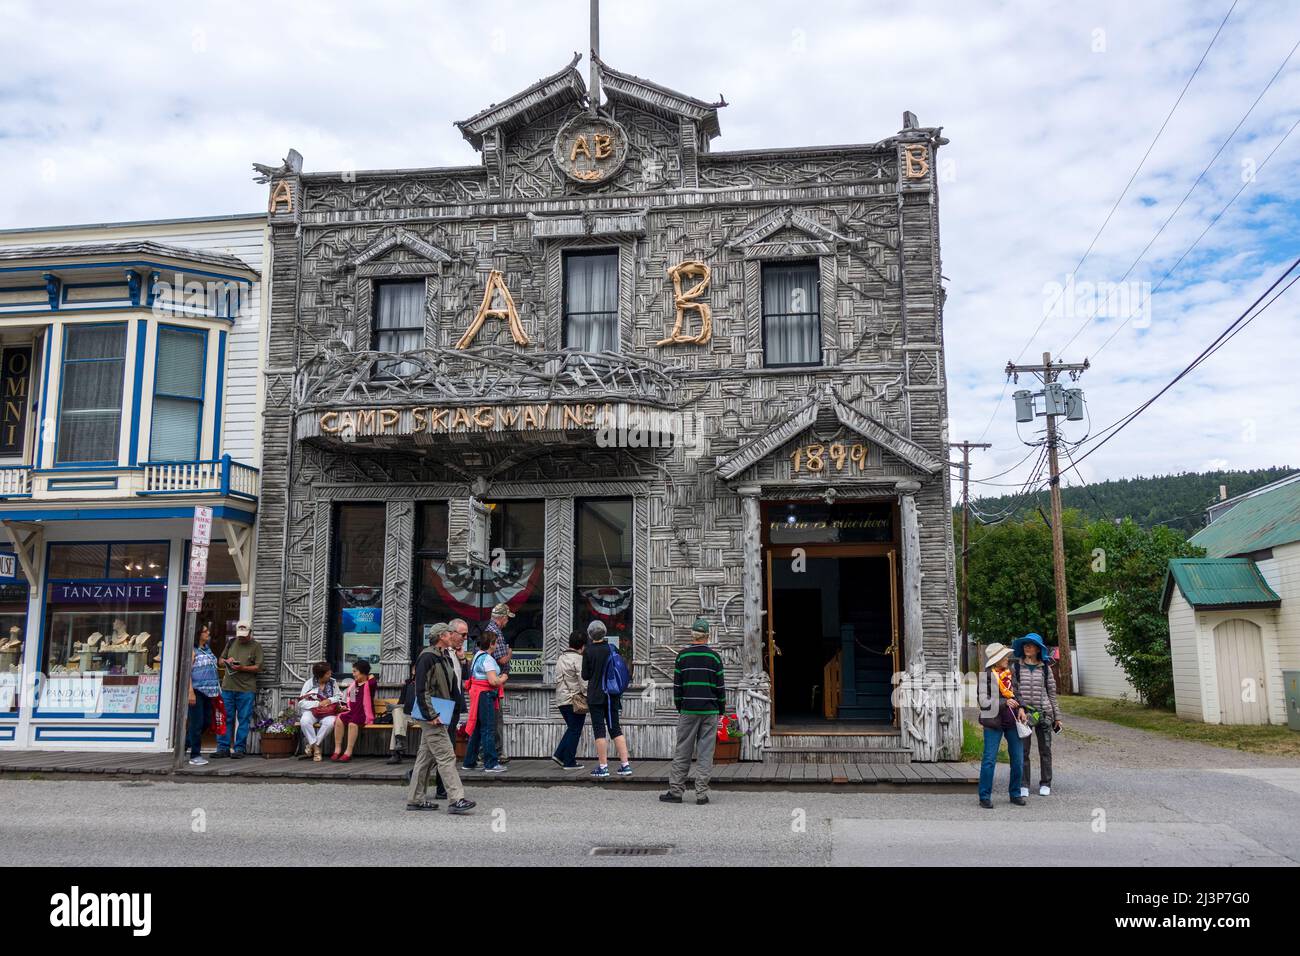 Artic Brotherhood Camp Skagway No. 1 Building From 1899 A Meeting Hall For Gold Miners And Prospectors Mining In The Klondike Gold Fields Facade Cover Stock Photo